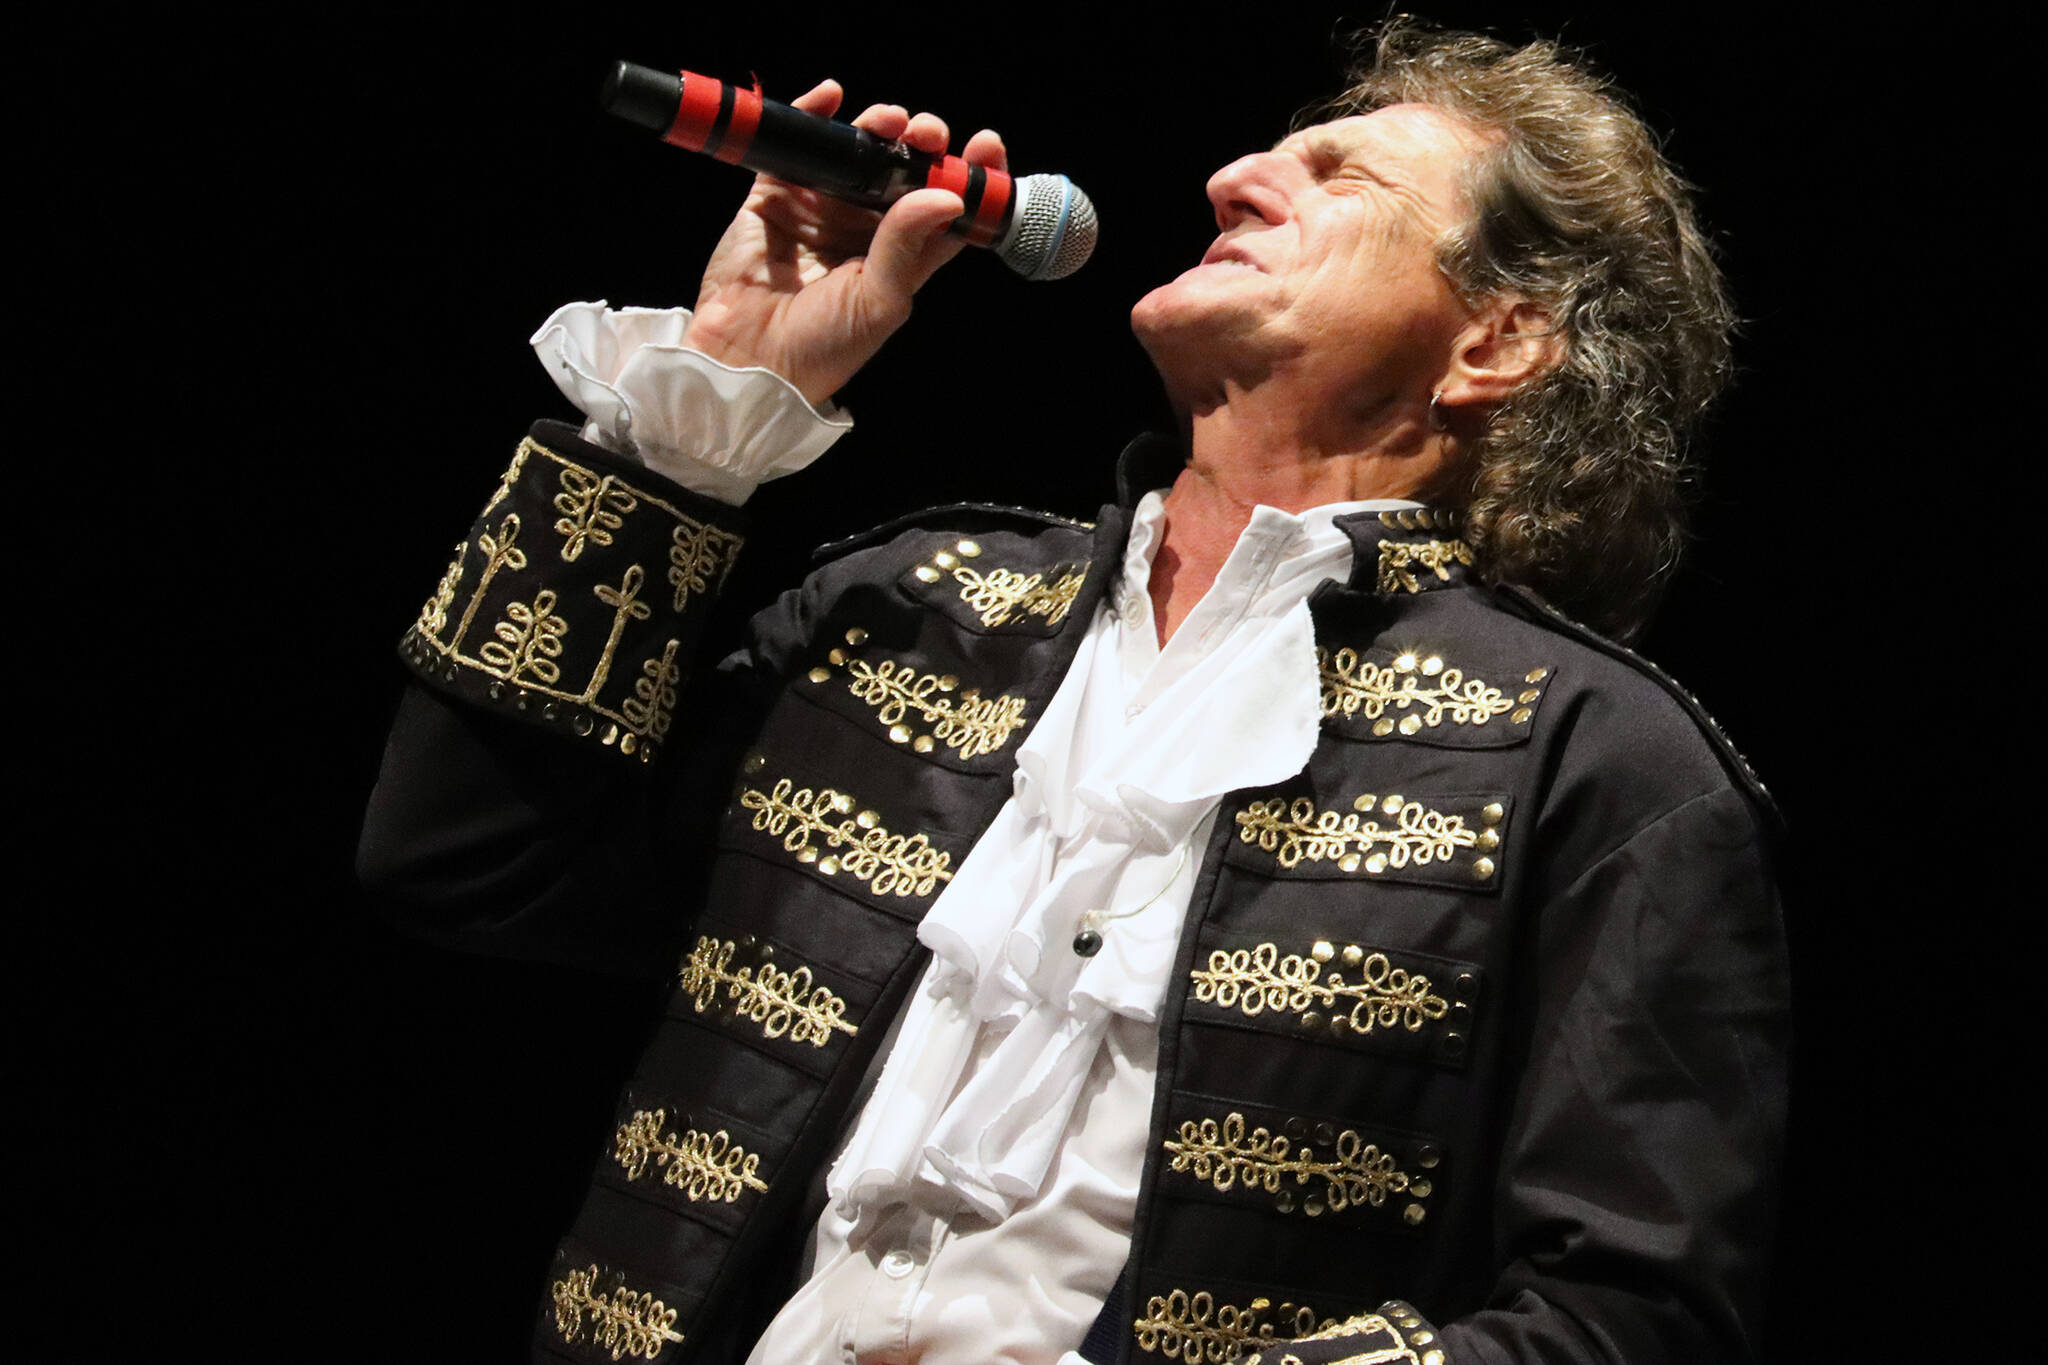 David Huizenga, lead vocalist for Paul Revere’s Raiders, rears his head back while singing during the band’s performance Tuesday night at Centennial Hall. (Ben Hohenstatt / Juneau Empire)